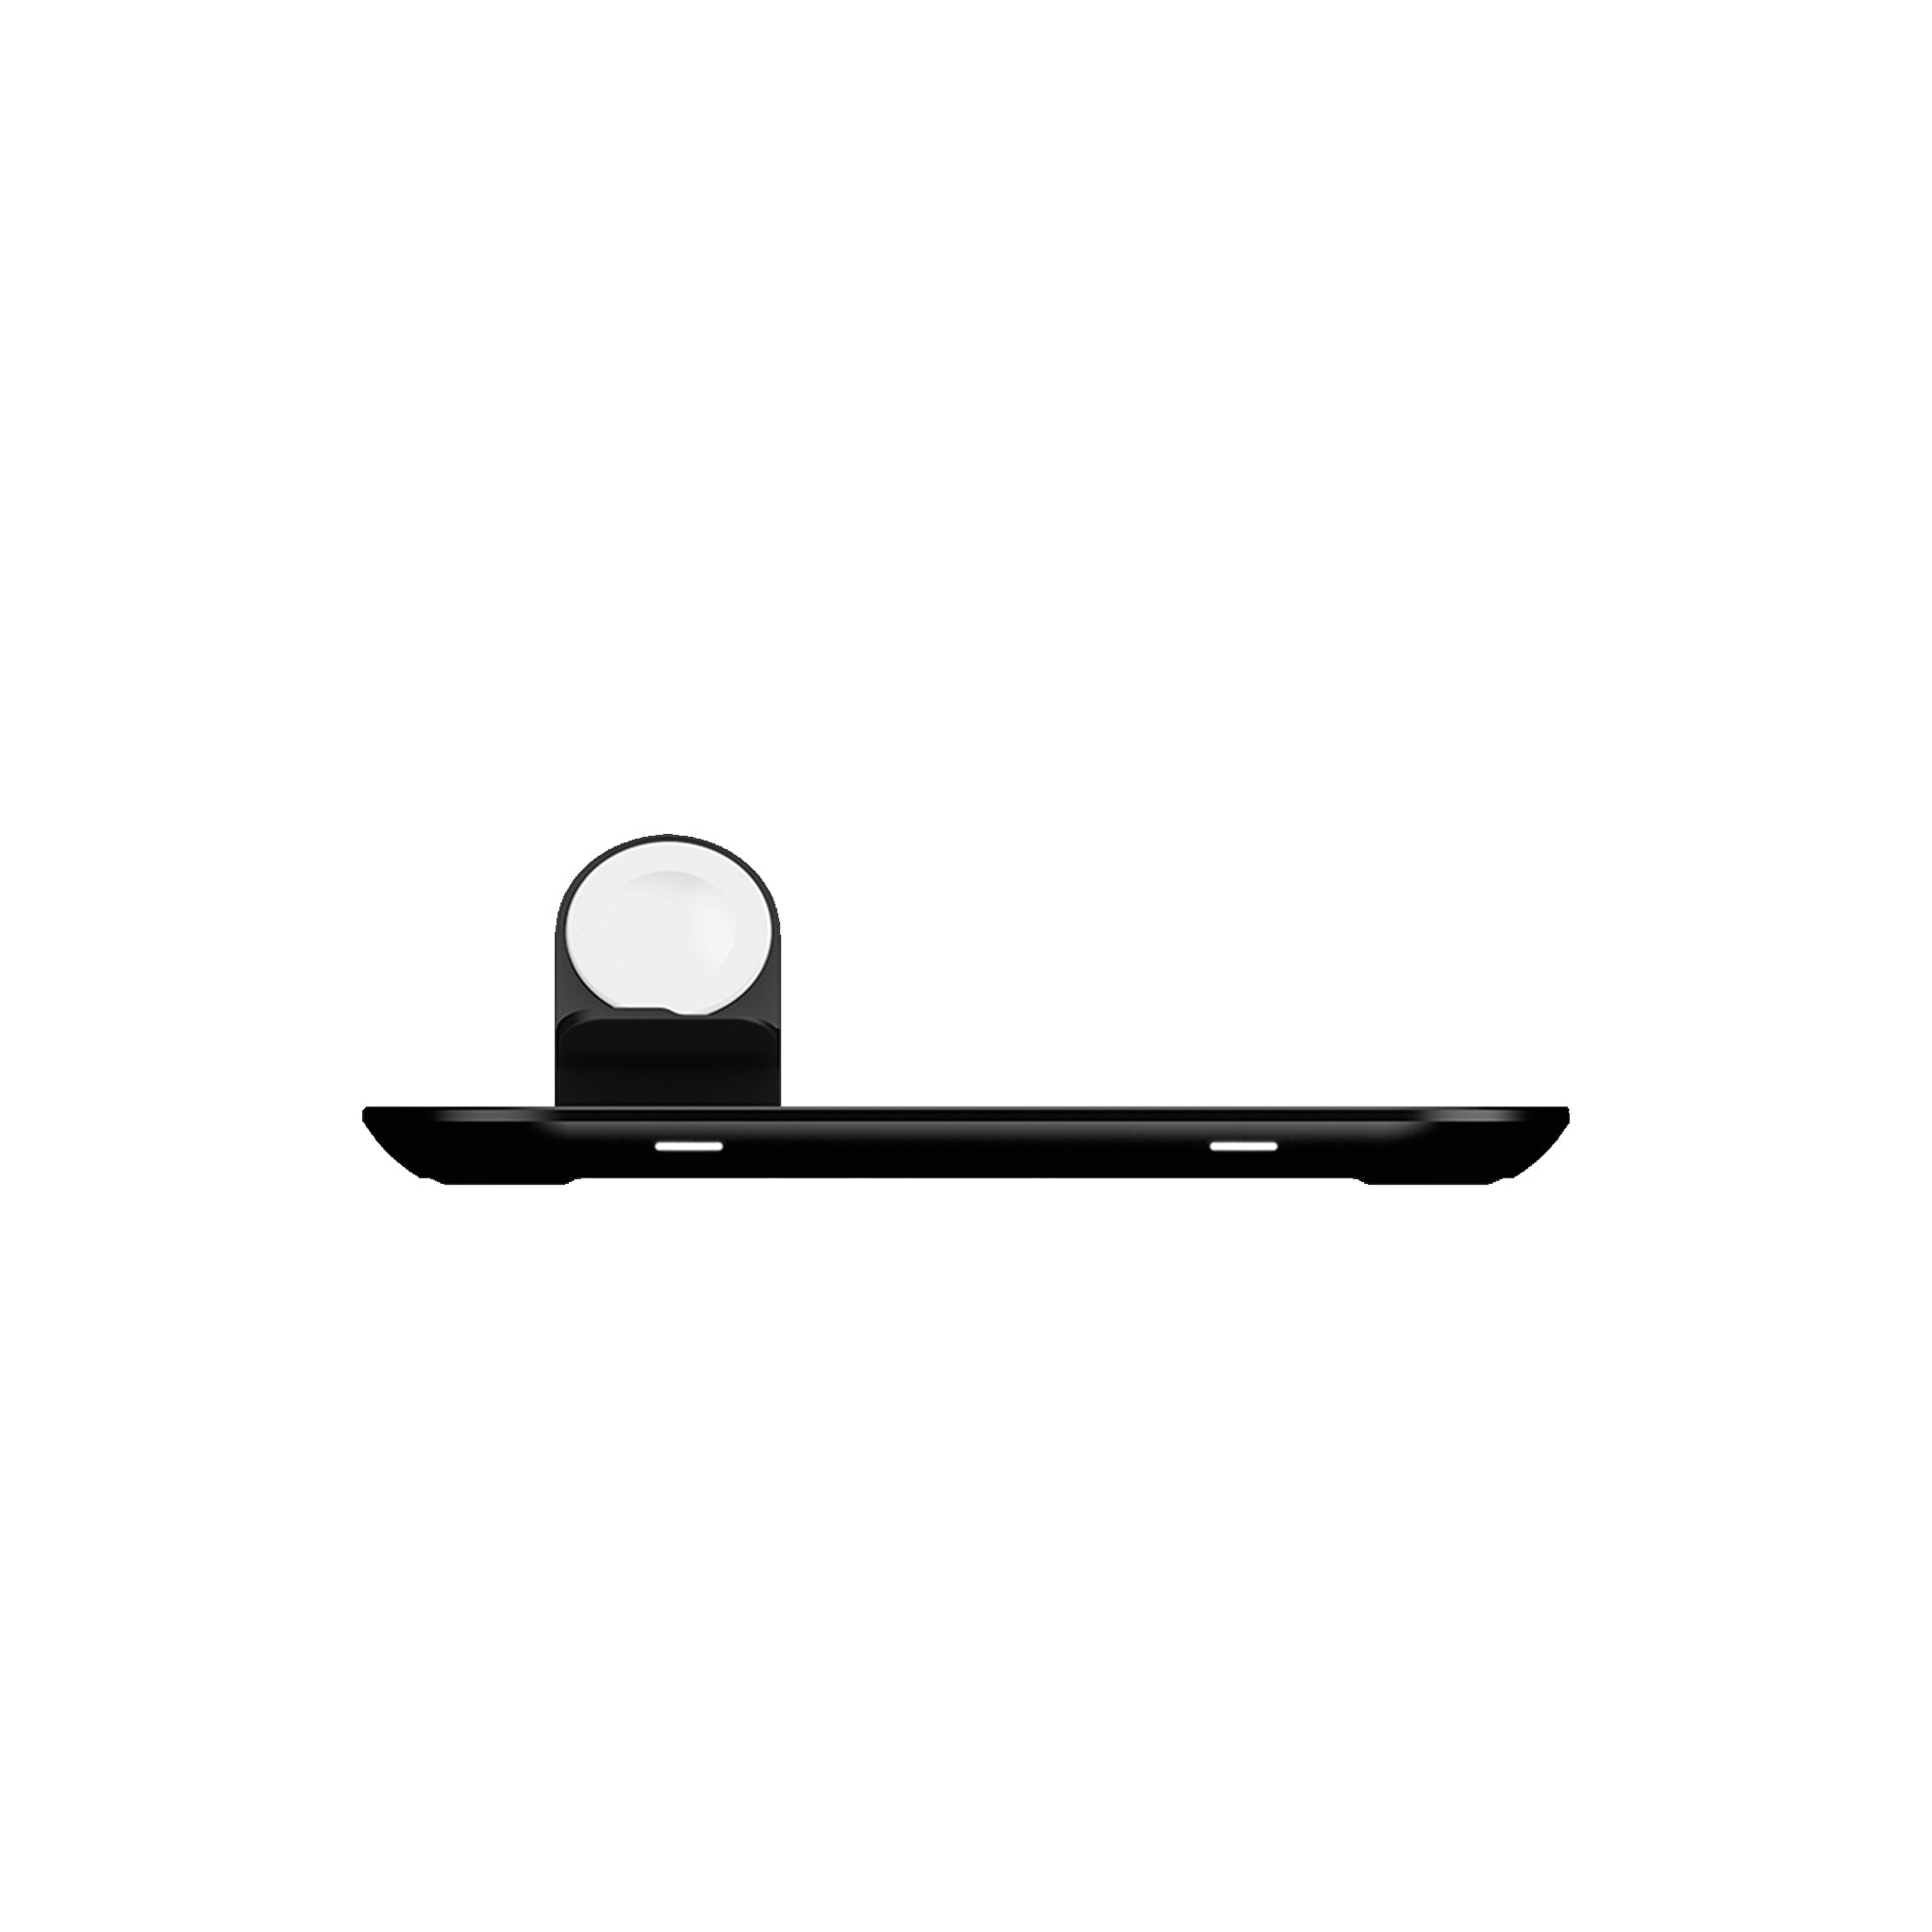 Mophie - 3-in-1 Wireless Charging Pad With Apple Watch Dock 7.5w - Black